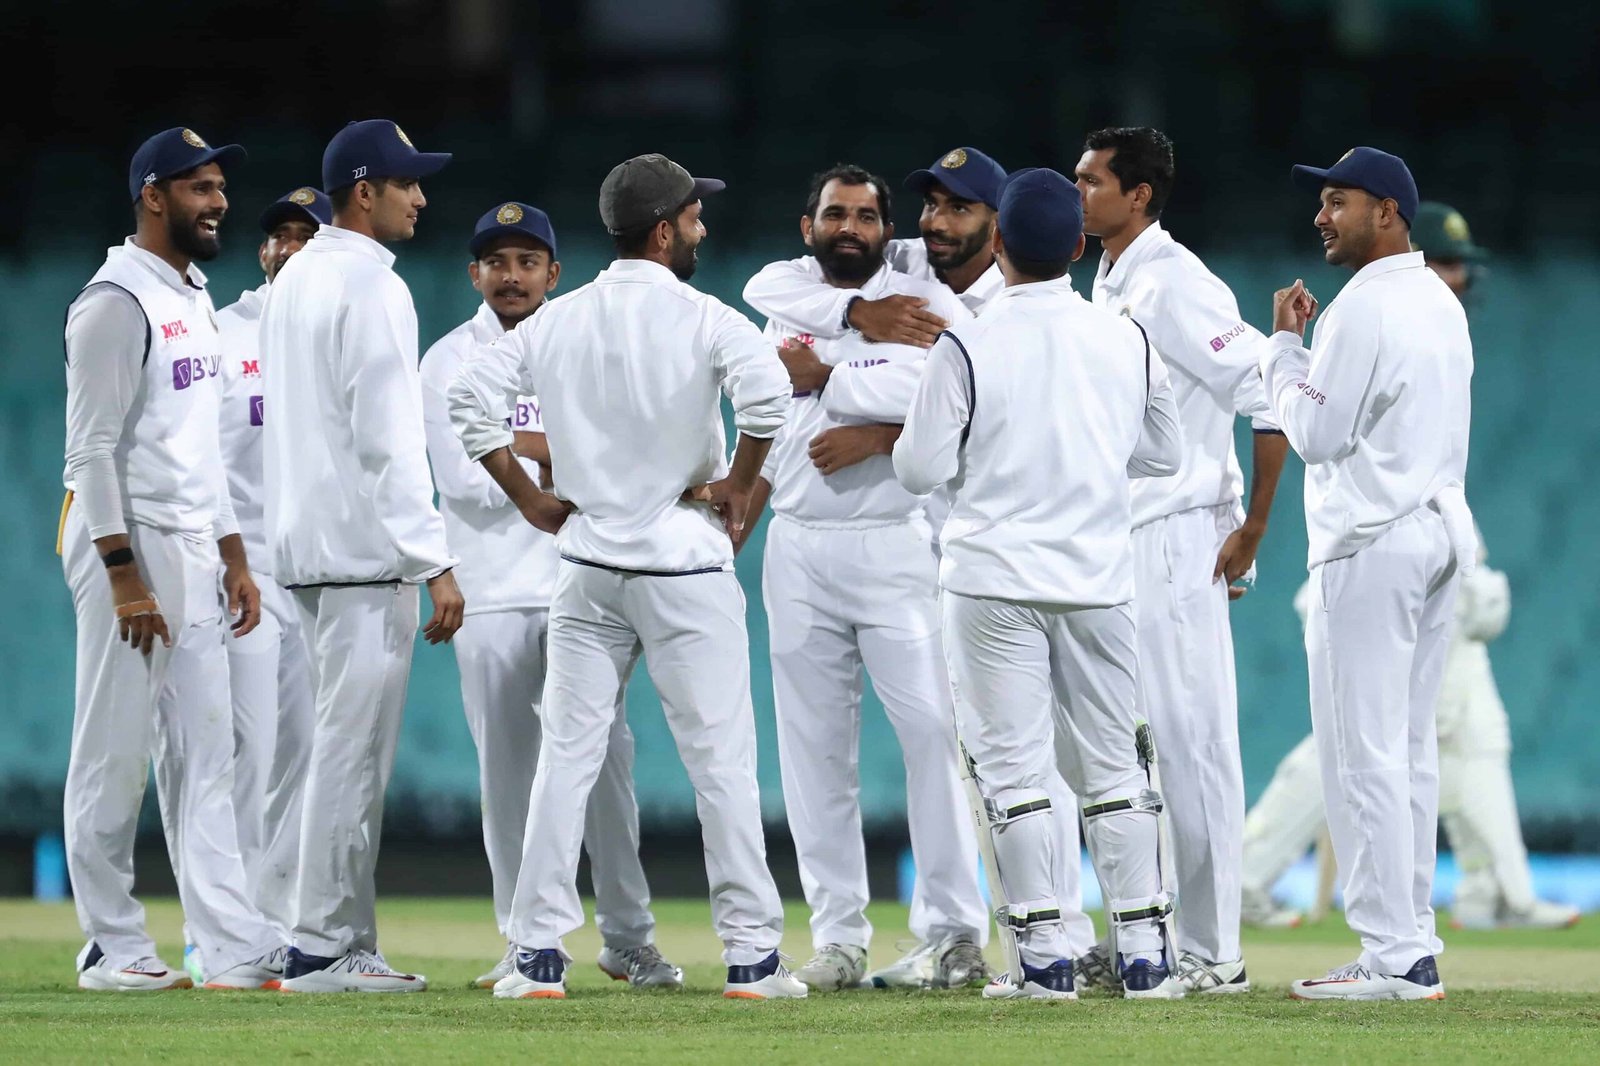 AUS vs IND Test Match Dream11 Prediction, Fantasy Cricket Tips, Playing XI, Pitch Report and Players Record | Australia vs India Test, 2020